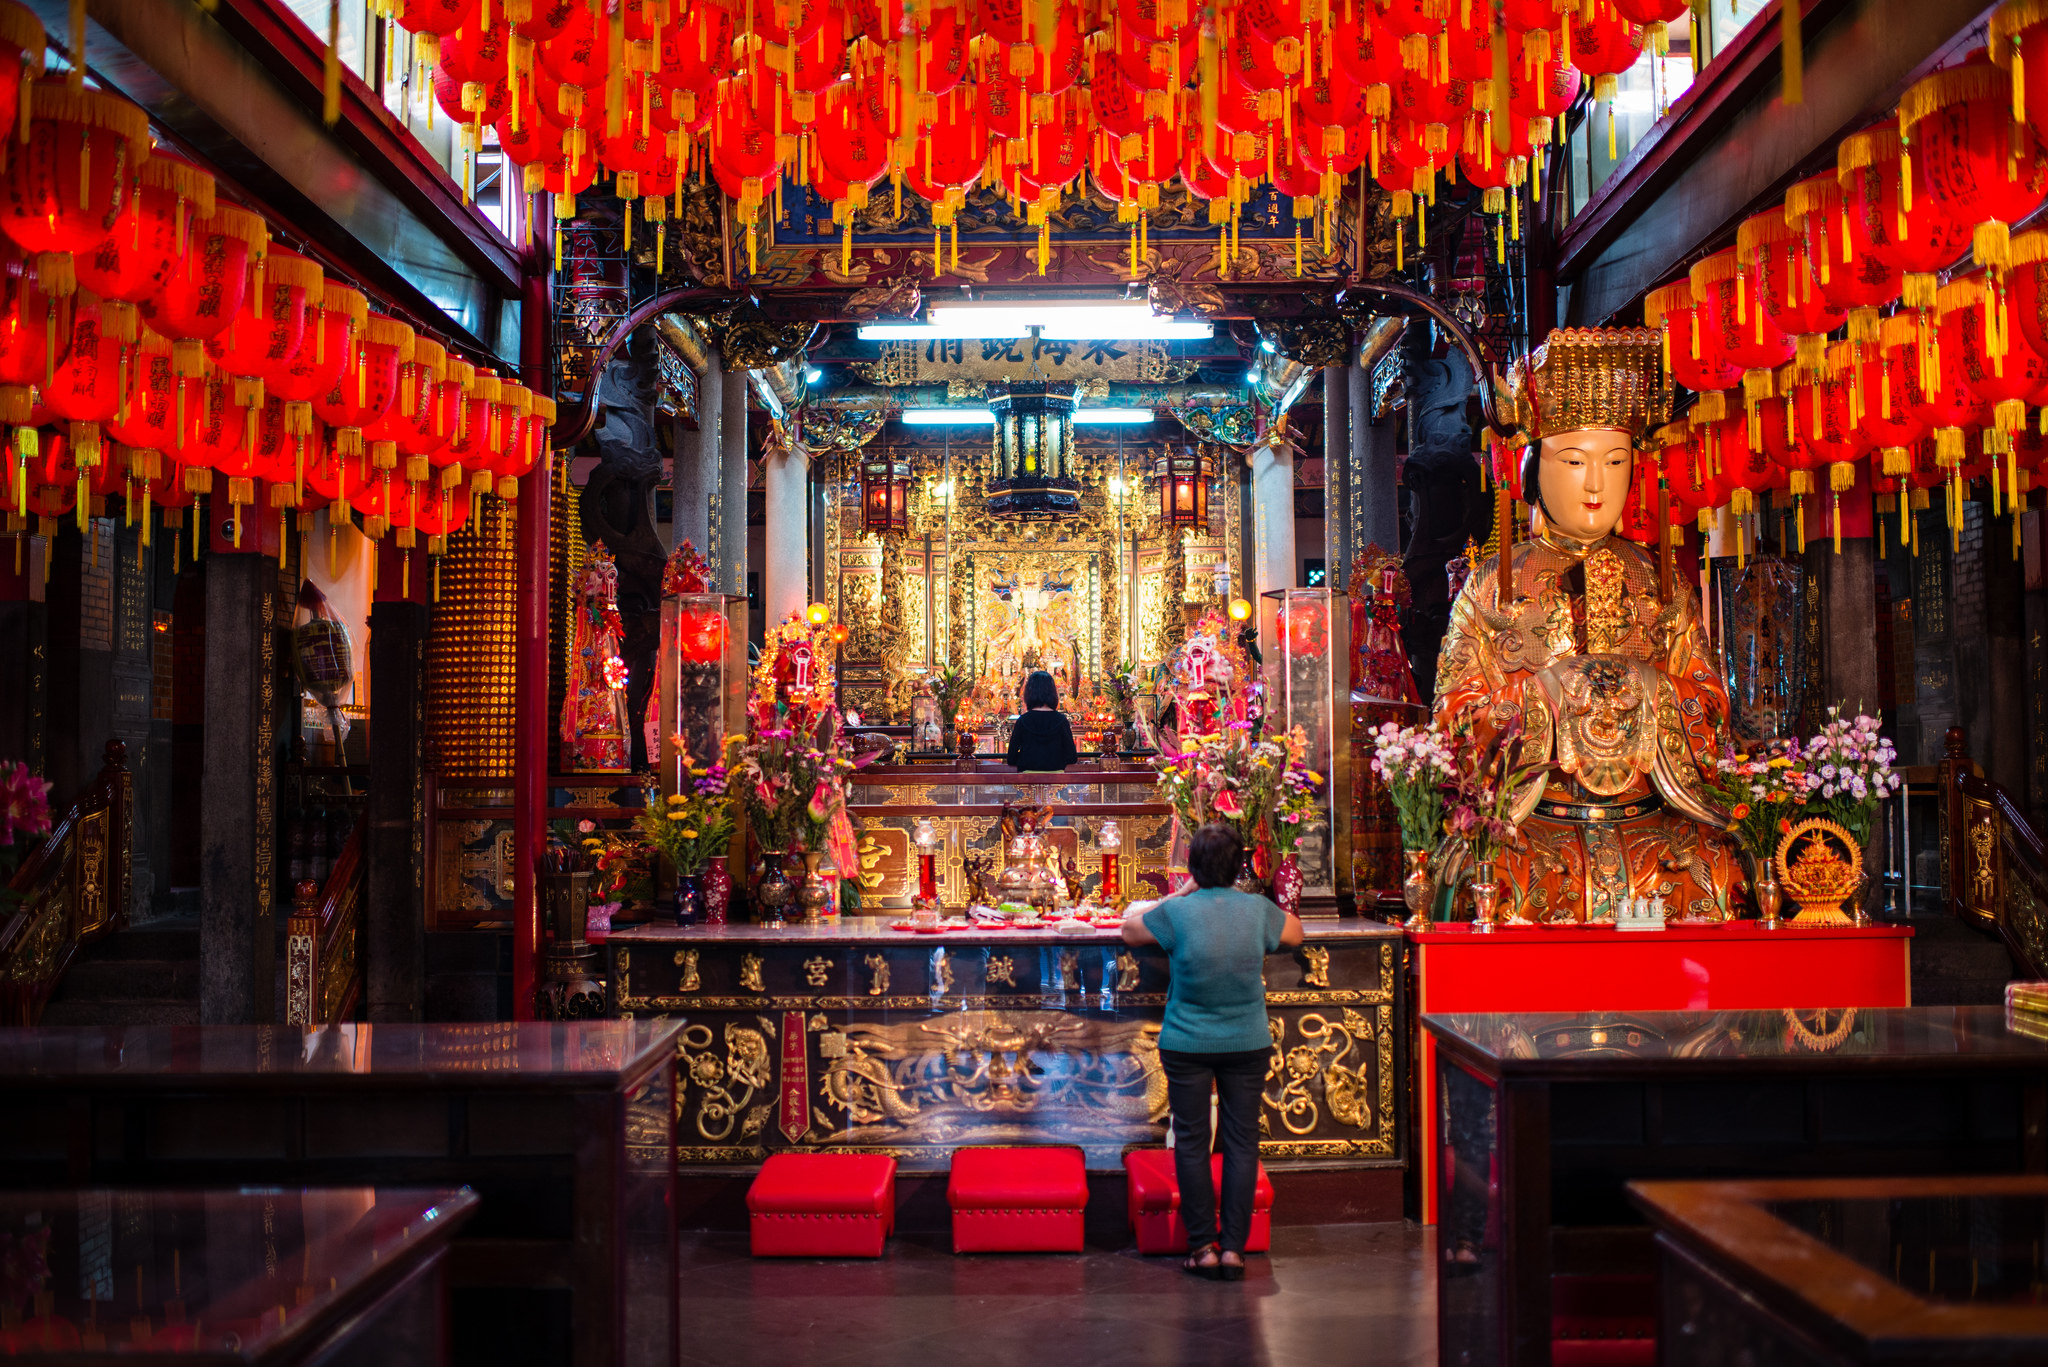 The Tien-Ho Temple is a vision of suspended lanterns. Pic: Jorge Gonzalez/flickr